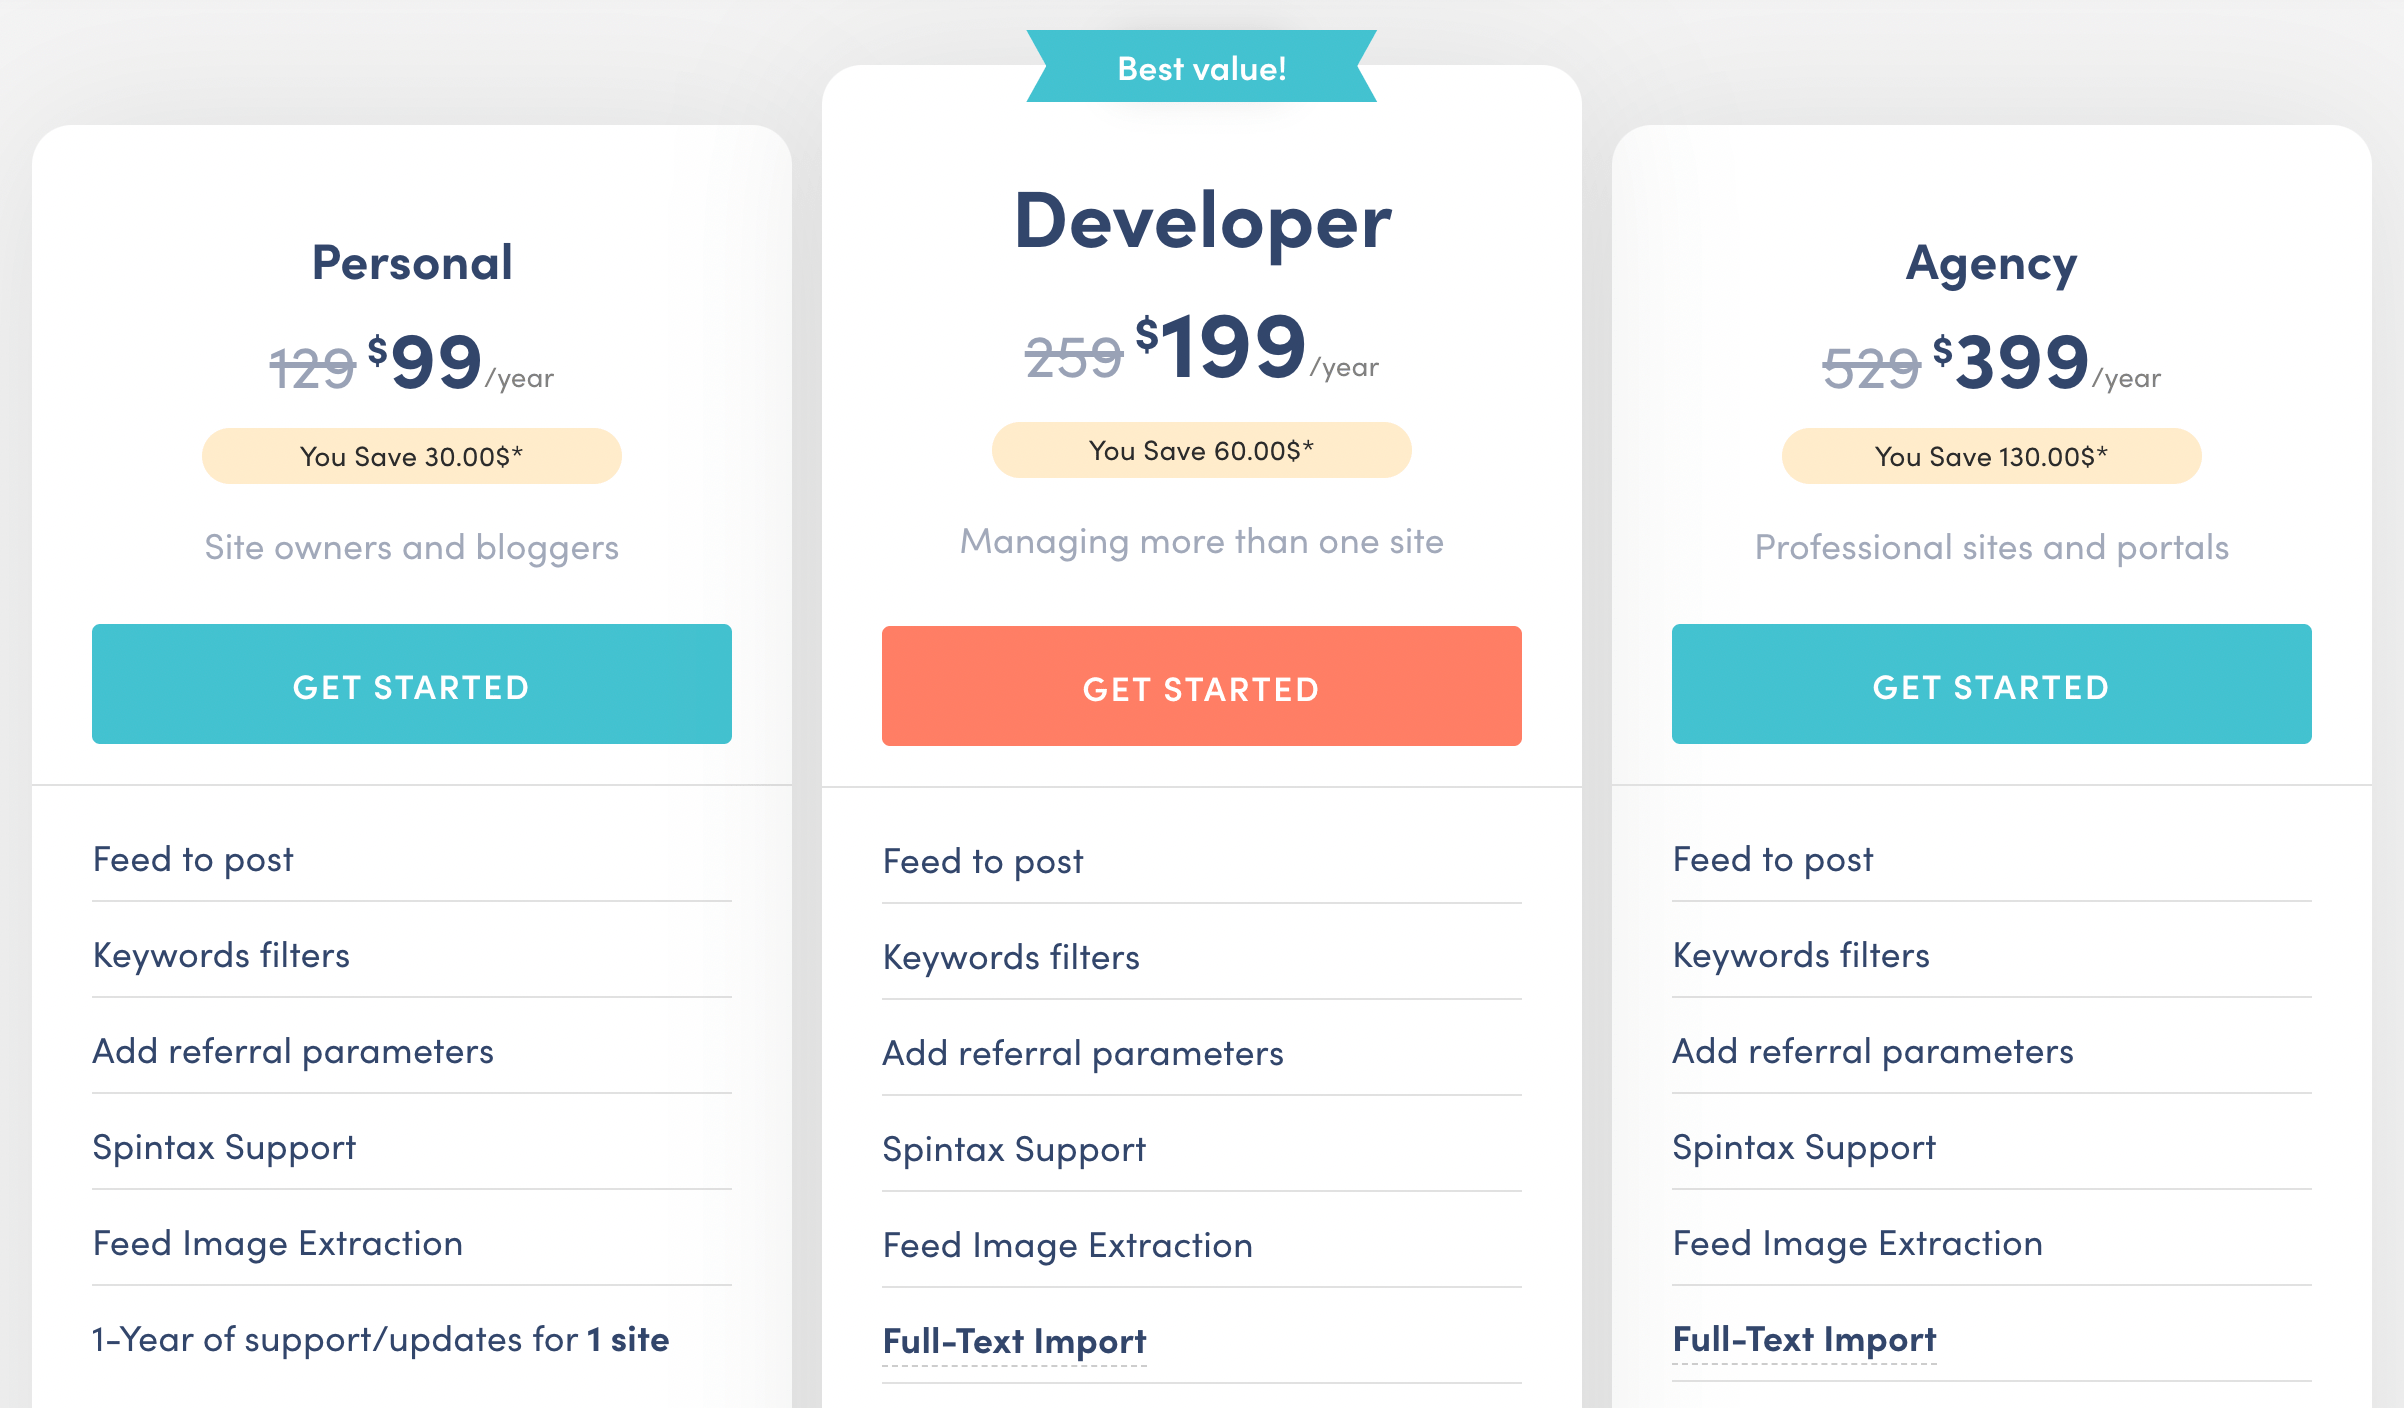 The Feezy pricing page